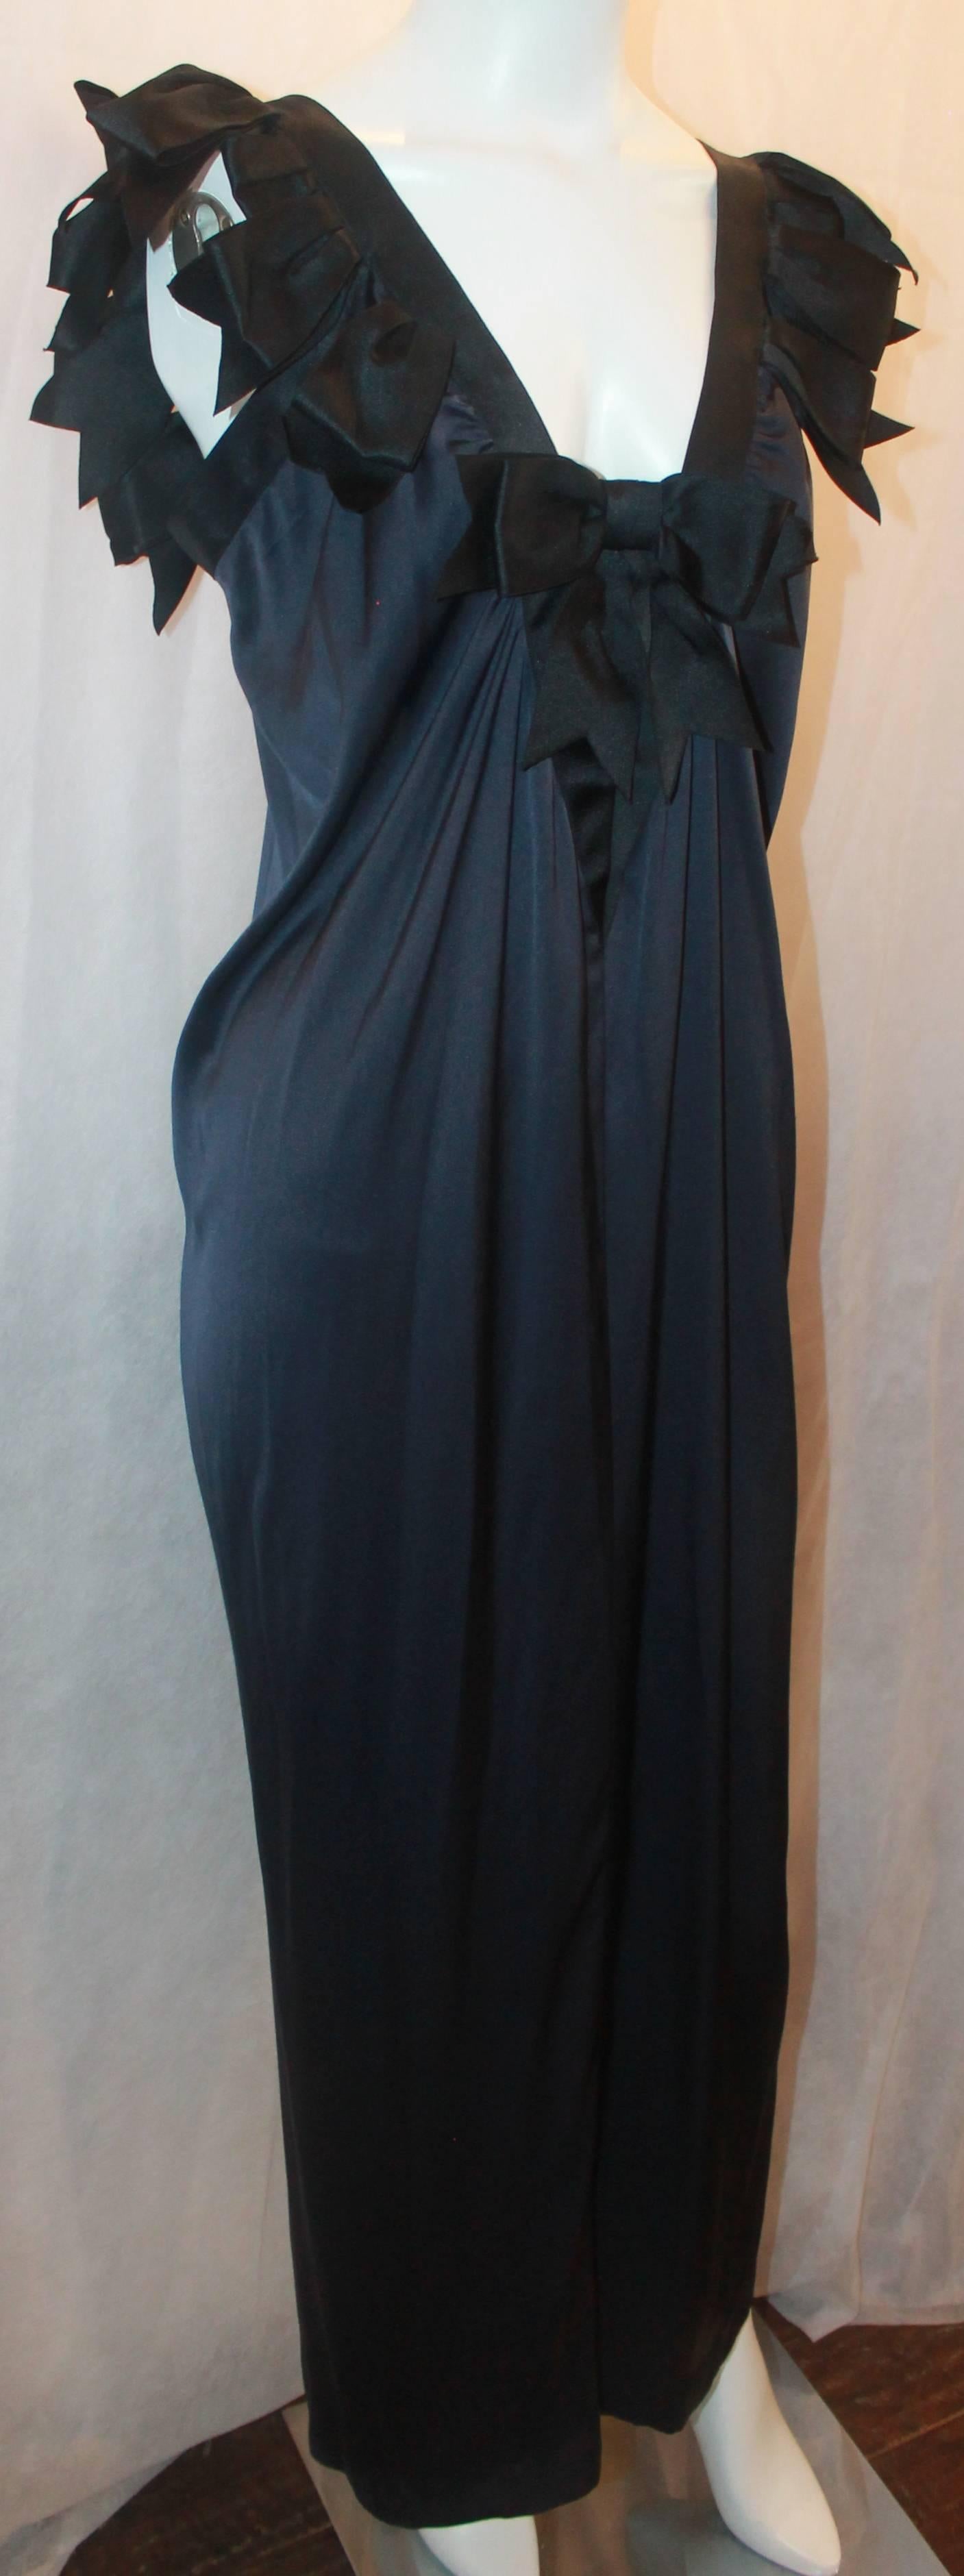 Chanel Navy Silk Gown with Black Bows - 42 - 09C. This gown is in excellent condition and is a gorgeous, signature Chanel piece. The gown has a ruched appearance in the front with bows all along the neckline. The back of the gown  also has a